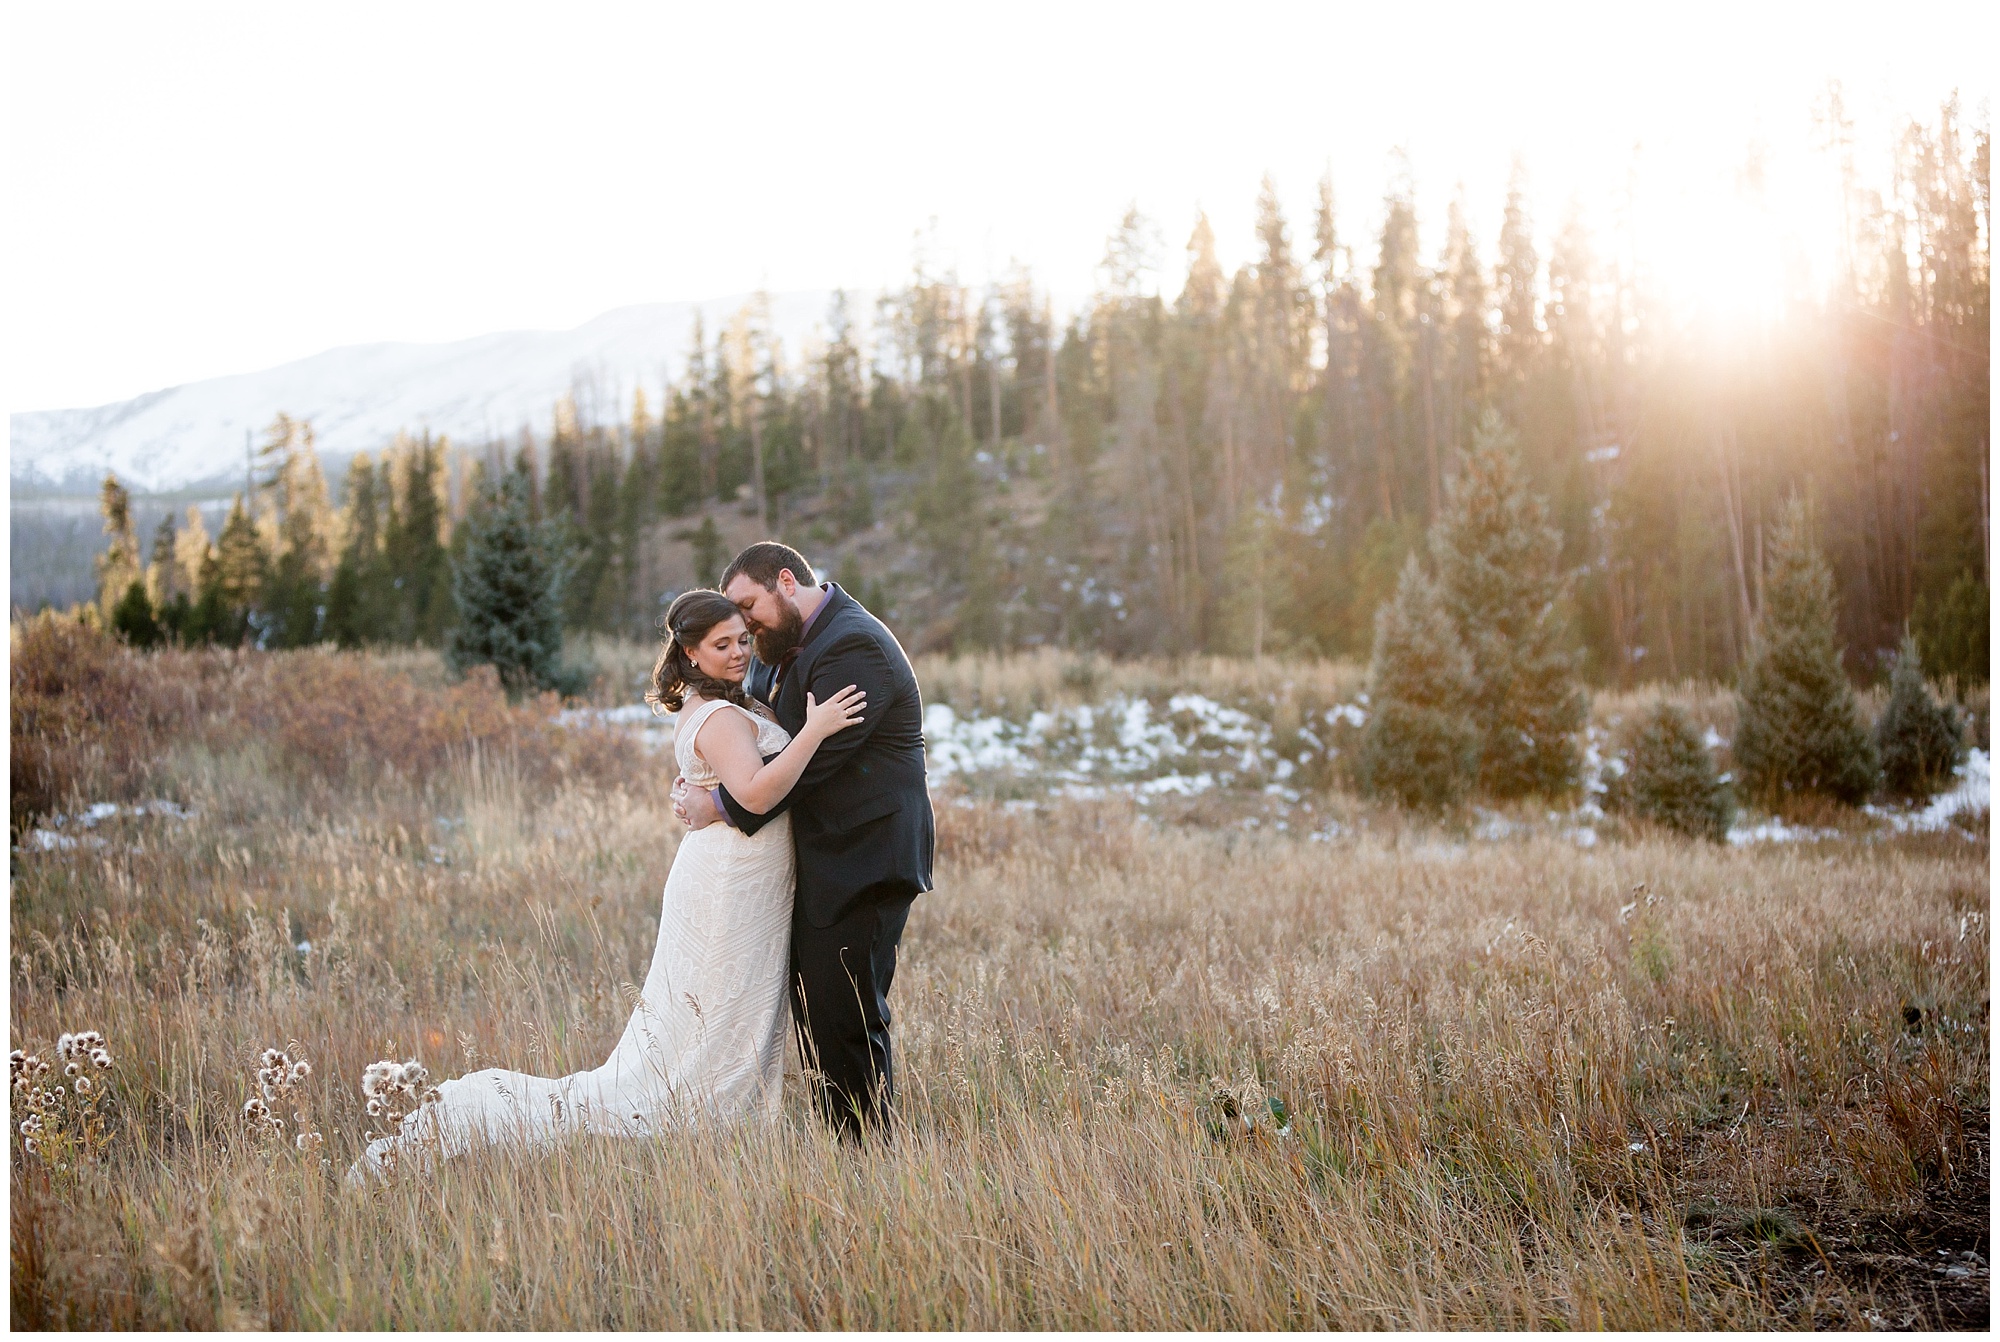 Groom leans in close to his bride during portraits at their Breckenridge mountain elopement.